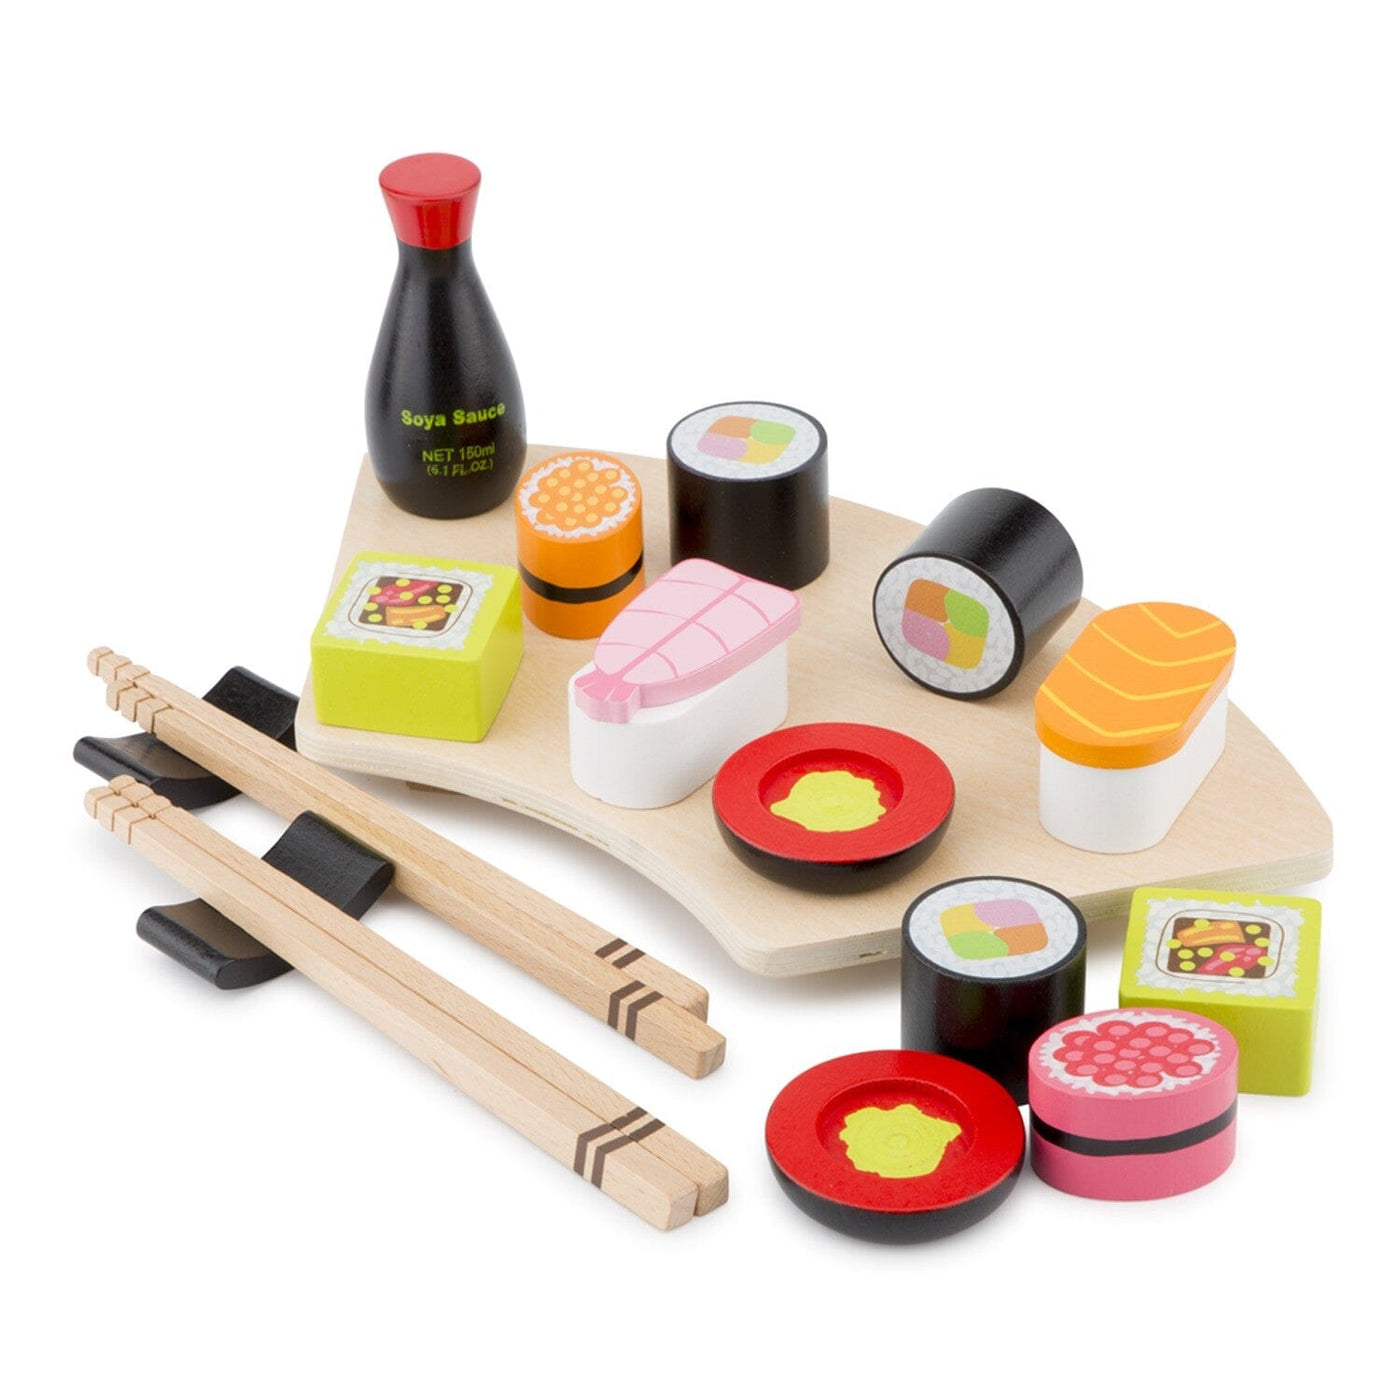 Sushi Set Wooden Toy New Classic Toys 